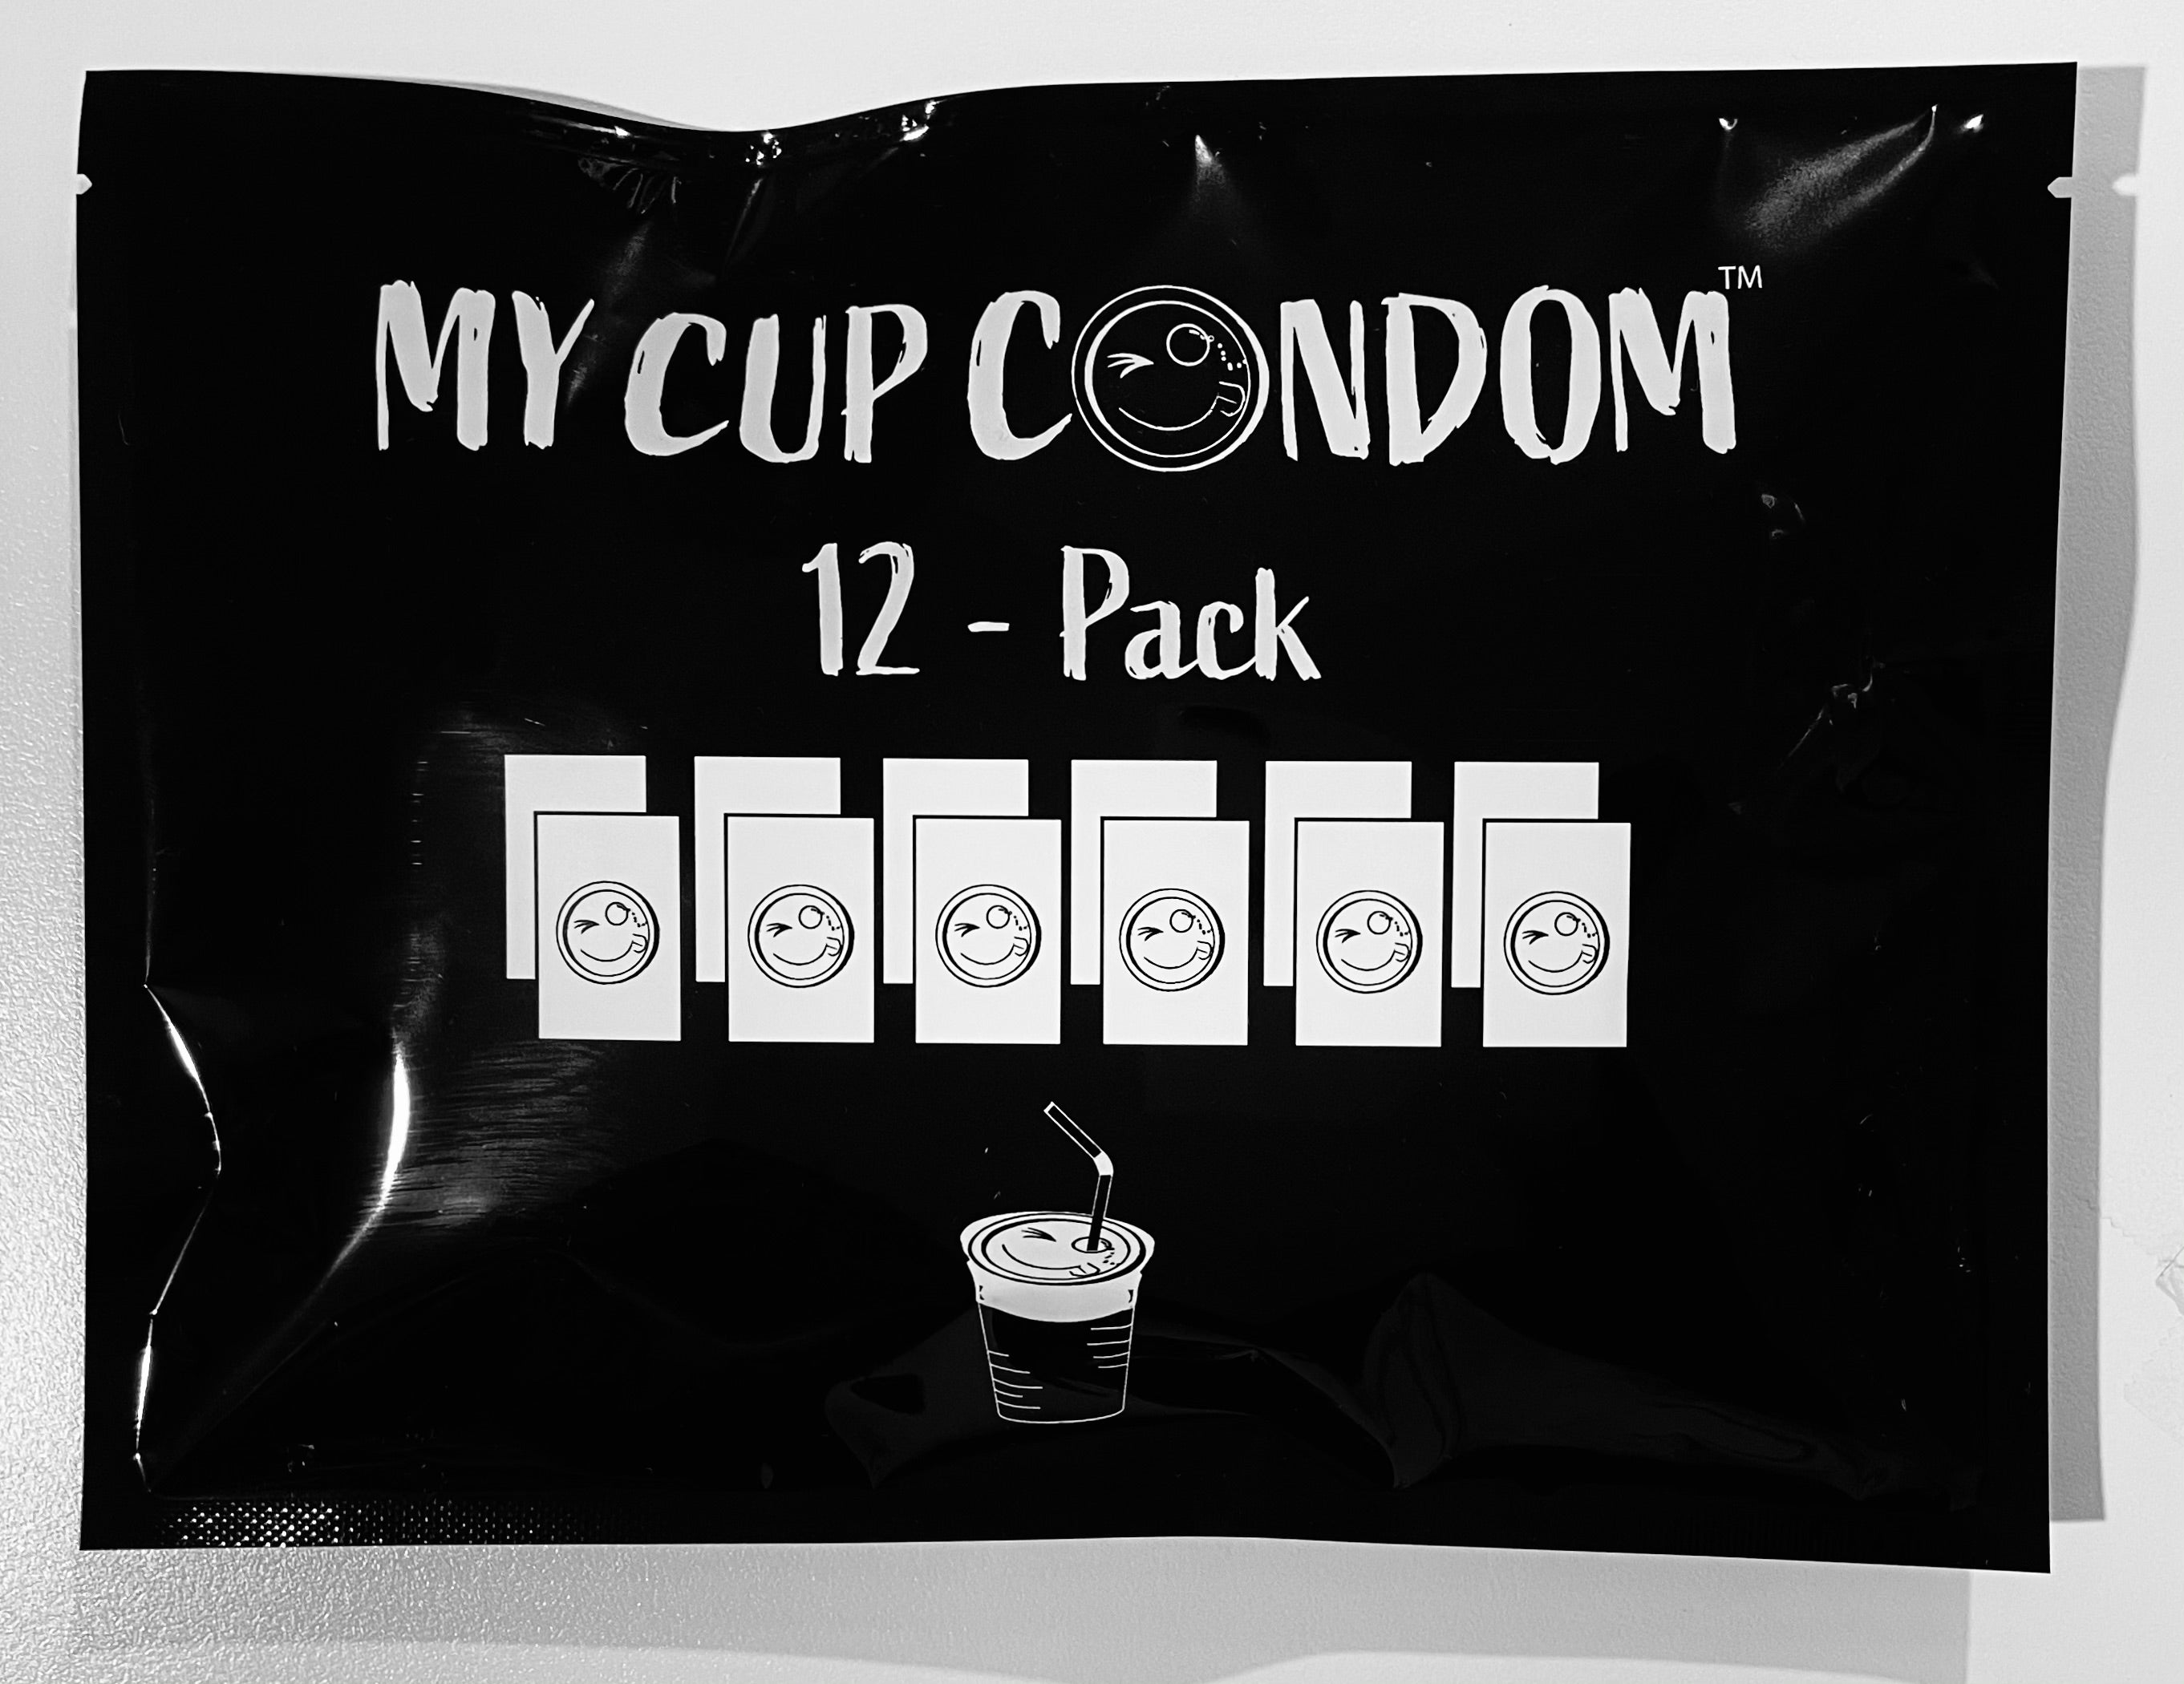 My Cup Cover Drink Protection Cap (12 Pack) - The Original Cup Cover for  Drink Spiking Prevention - 12 Individually Wrapped, Reusable, Latex Drink  Covers with Straw Hole, Fits All Cup Sizes 12 Count (Pack of 1)